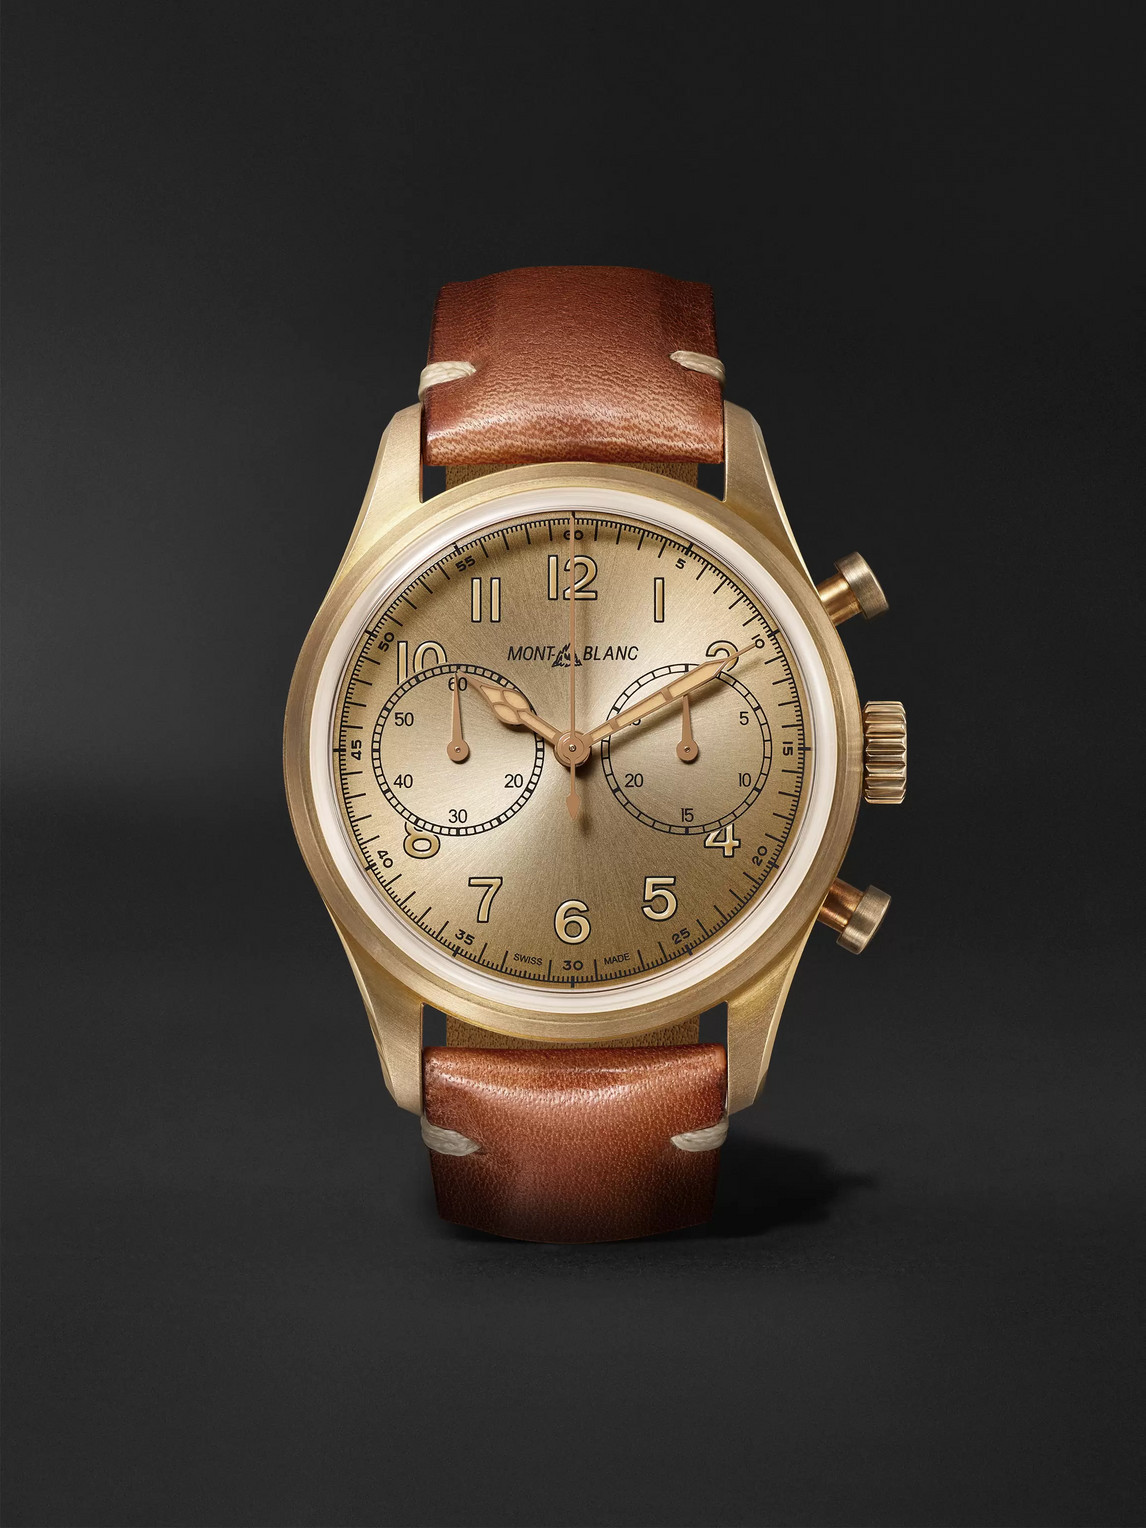 Montblanc 1858 Automatic Chronograph 42mm Bronze And Leather Watch, Ref. No. 118223 In Gold